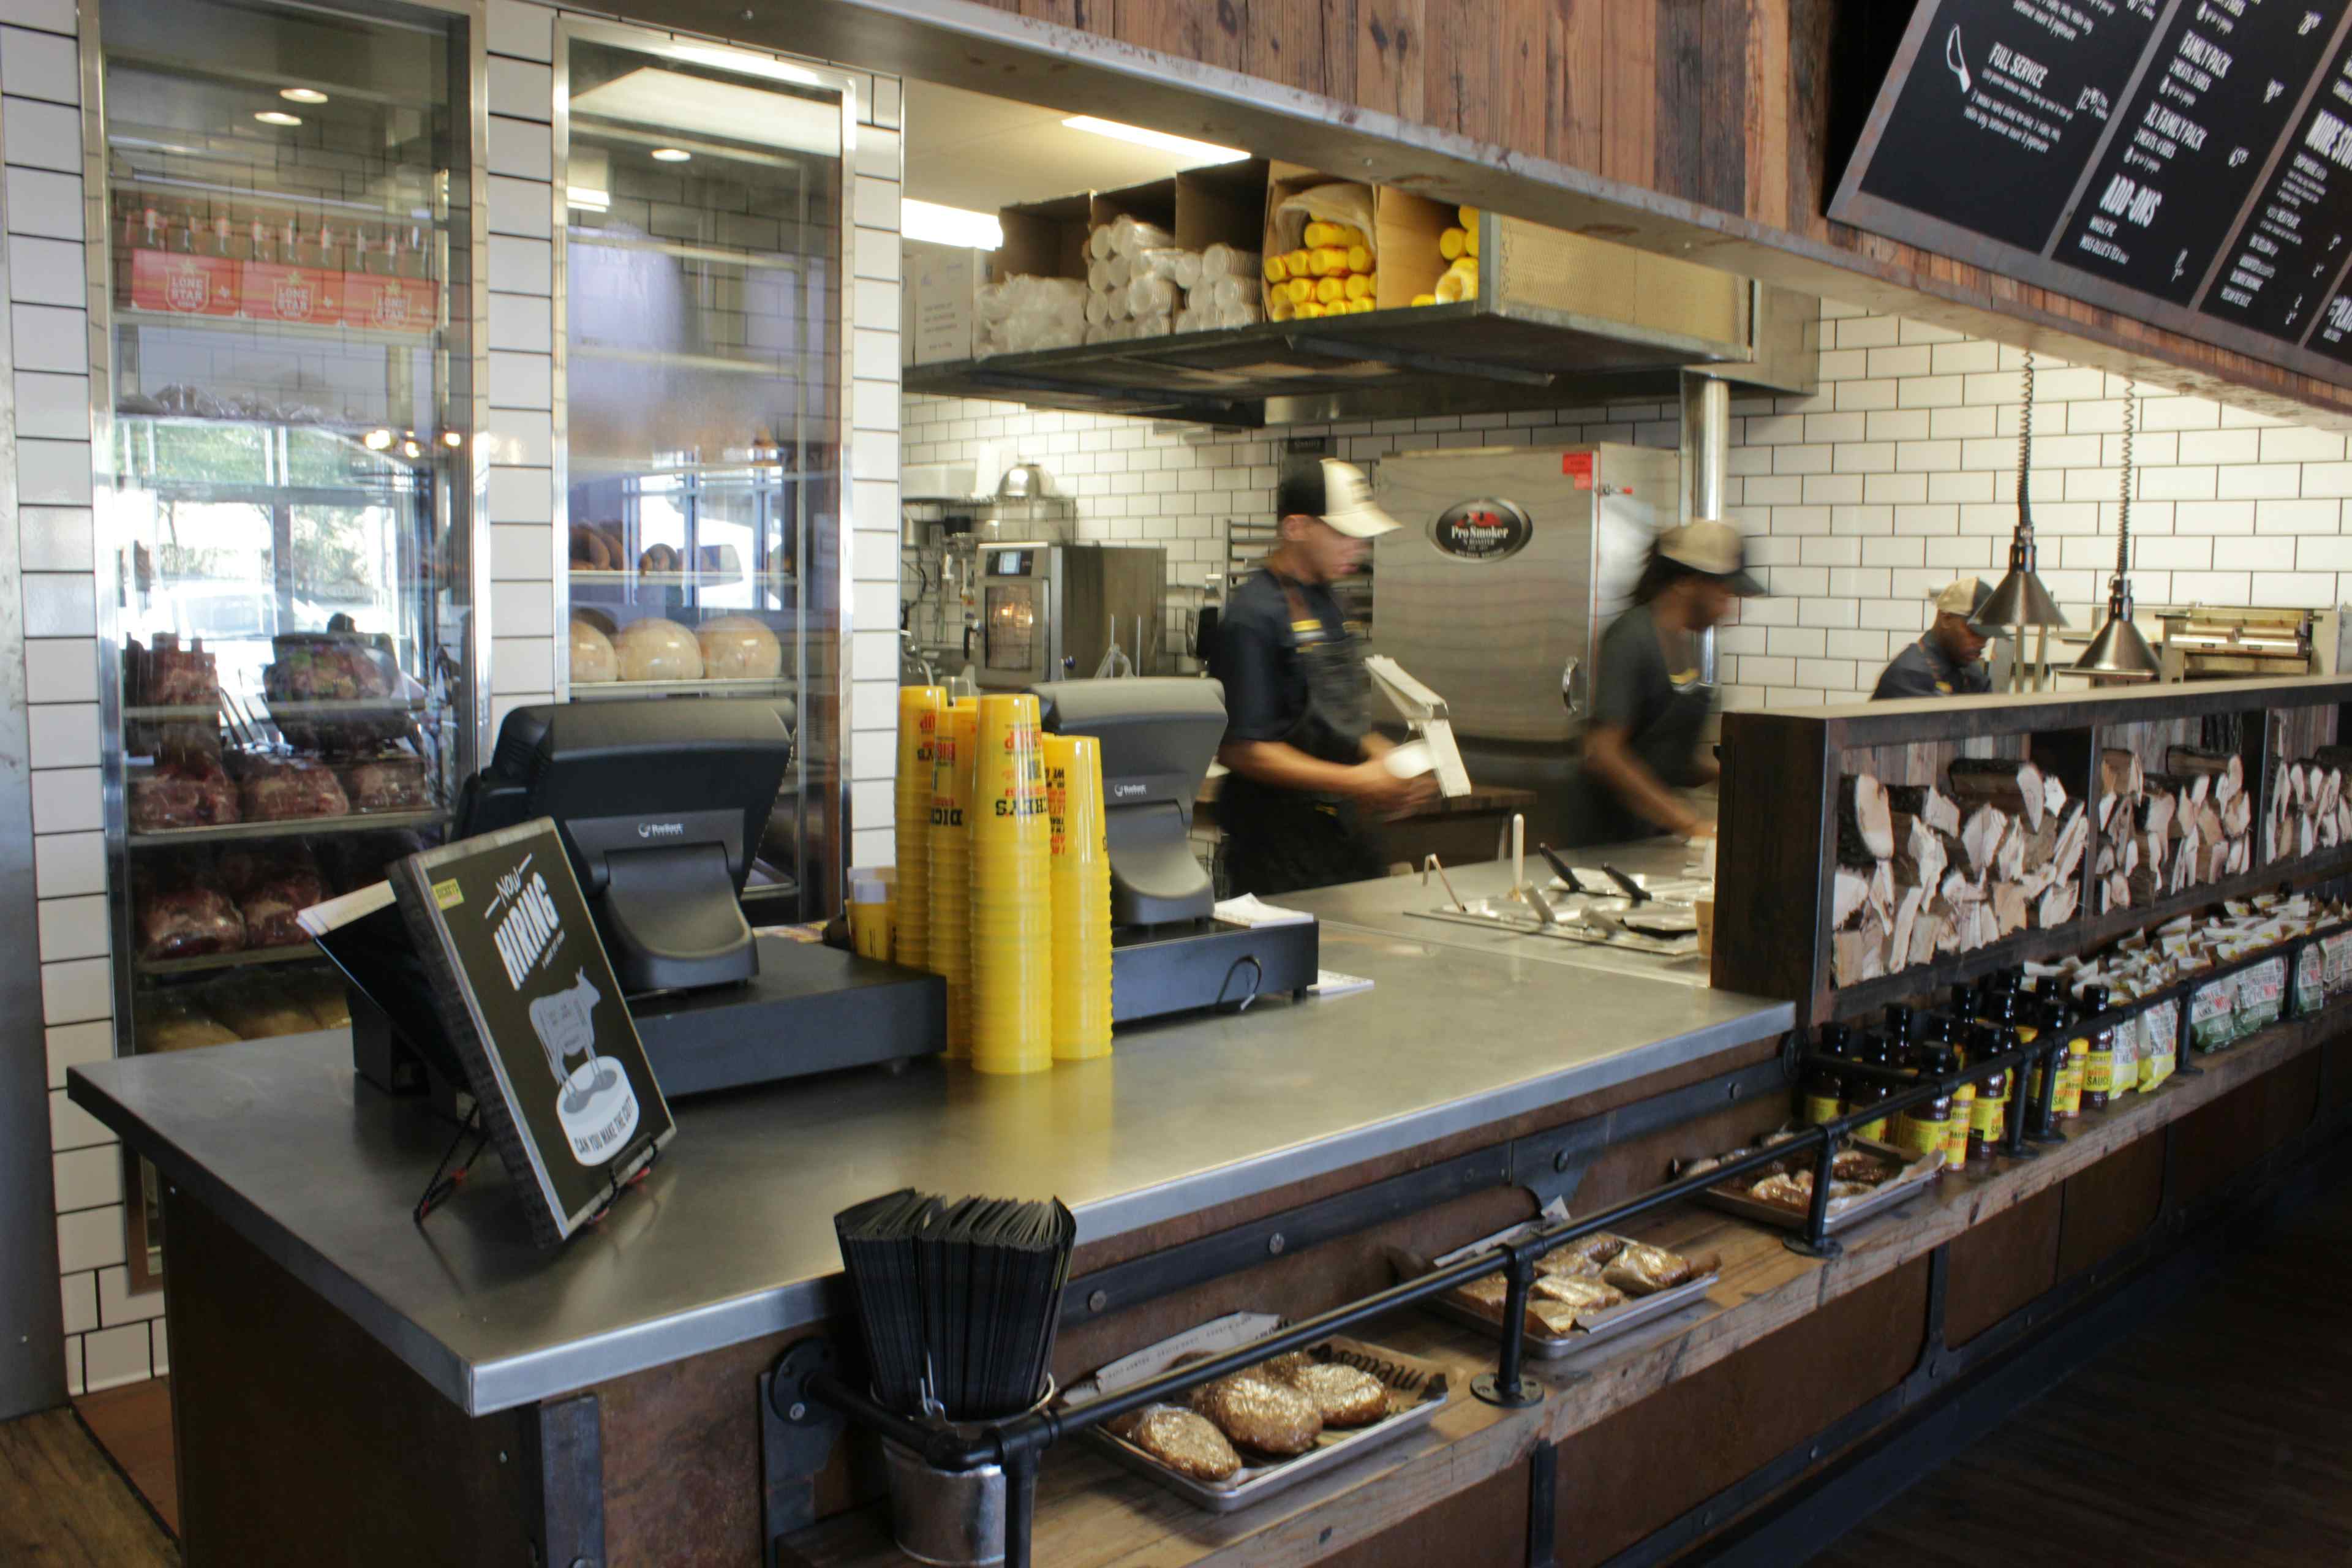 Foodservice Equipment Reports: KITCHEN DESIGN: Smokin’ In Style